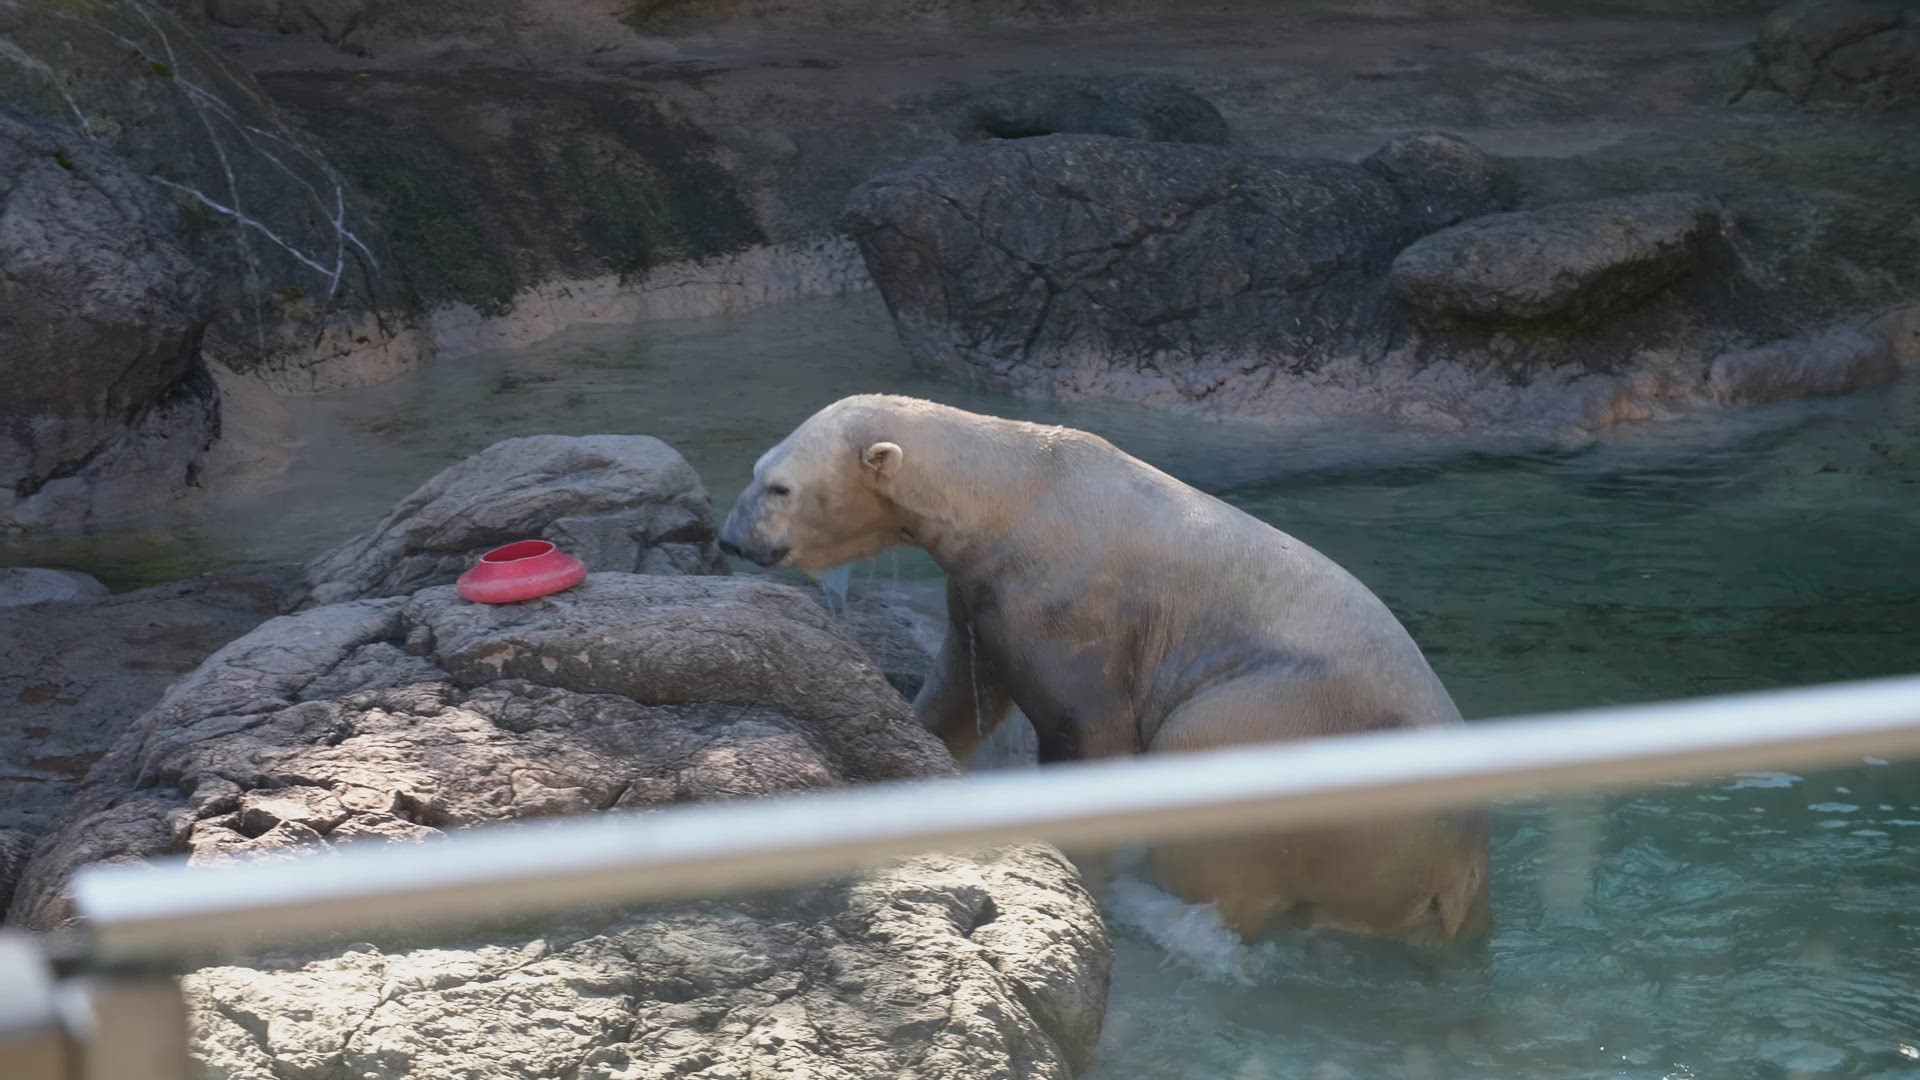 North Carolina Zoo officials hope Payton will hit it off with their female polar bear Anana, and the pair will have a cub. [Video Source: NC Zoo]